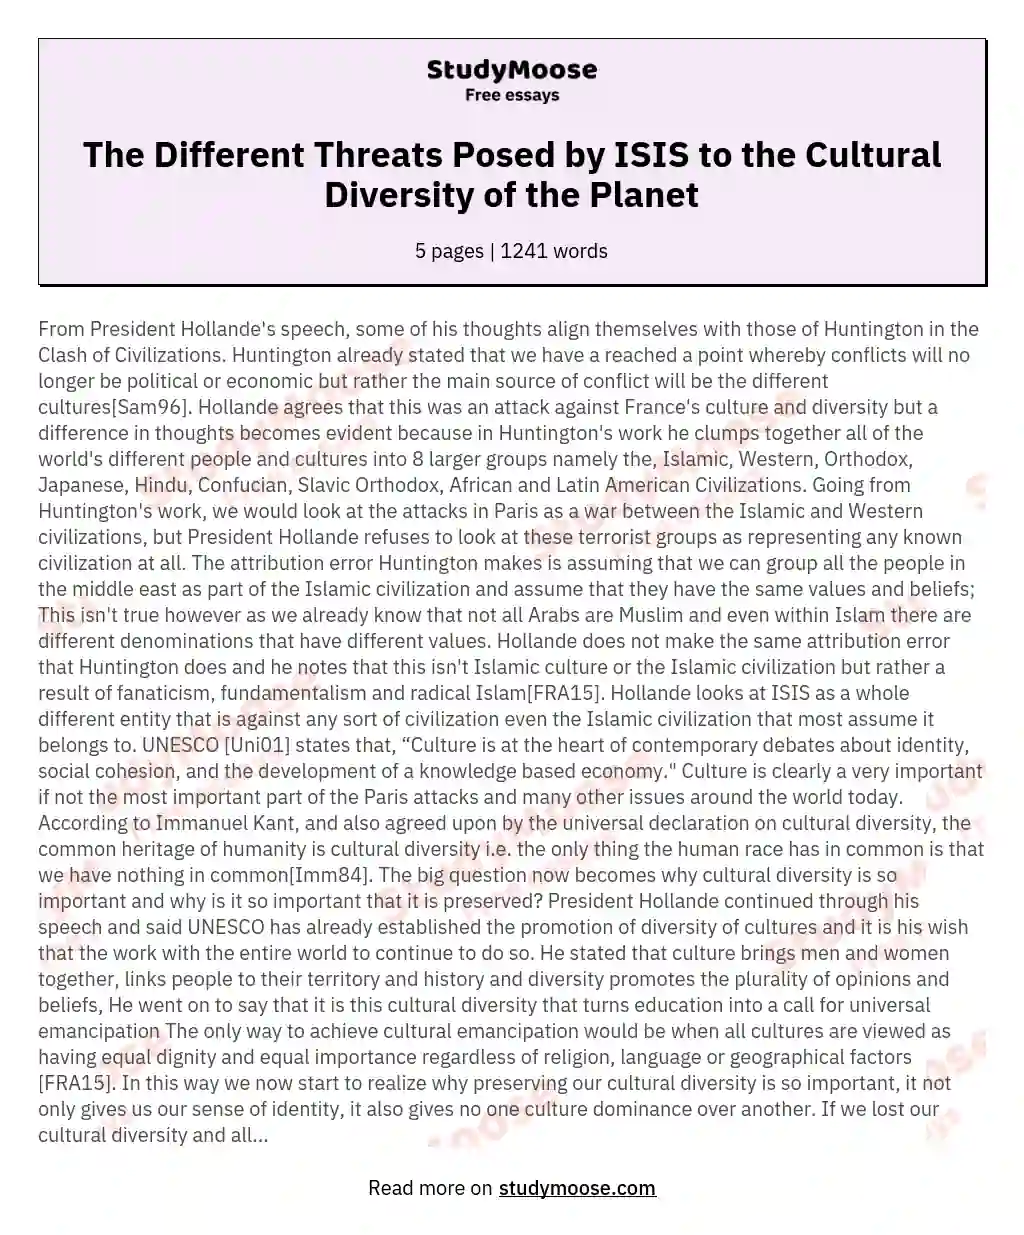 The Different Threats Posed by ISIS to the Cultural Diversity of the Planet essay